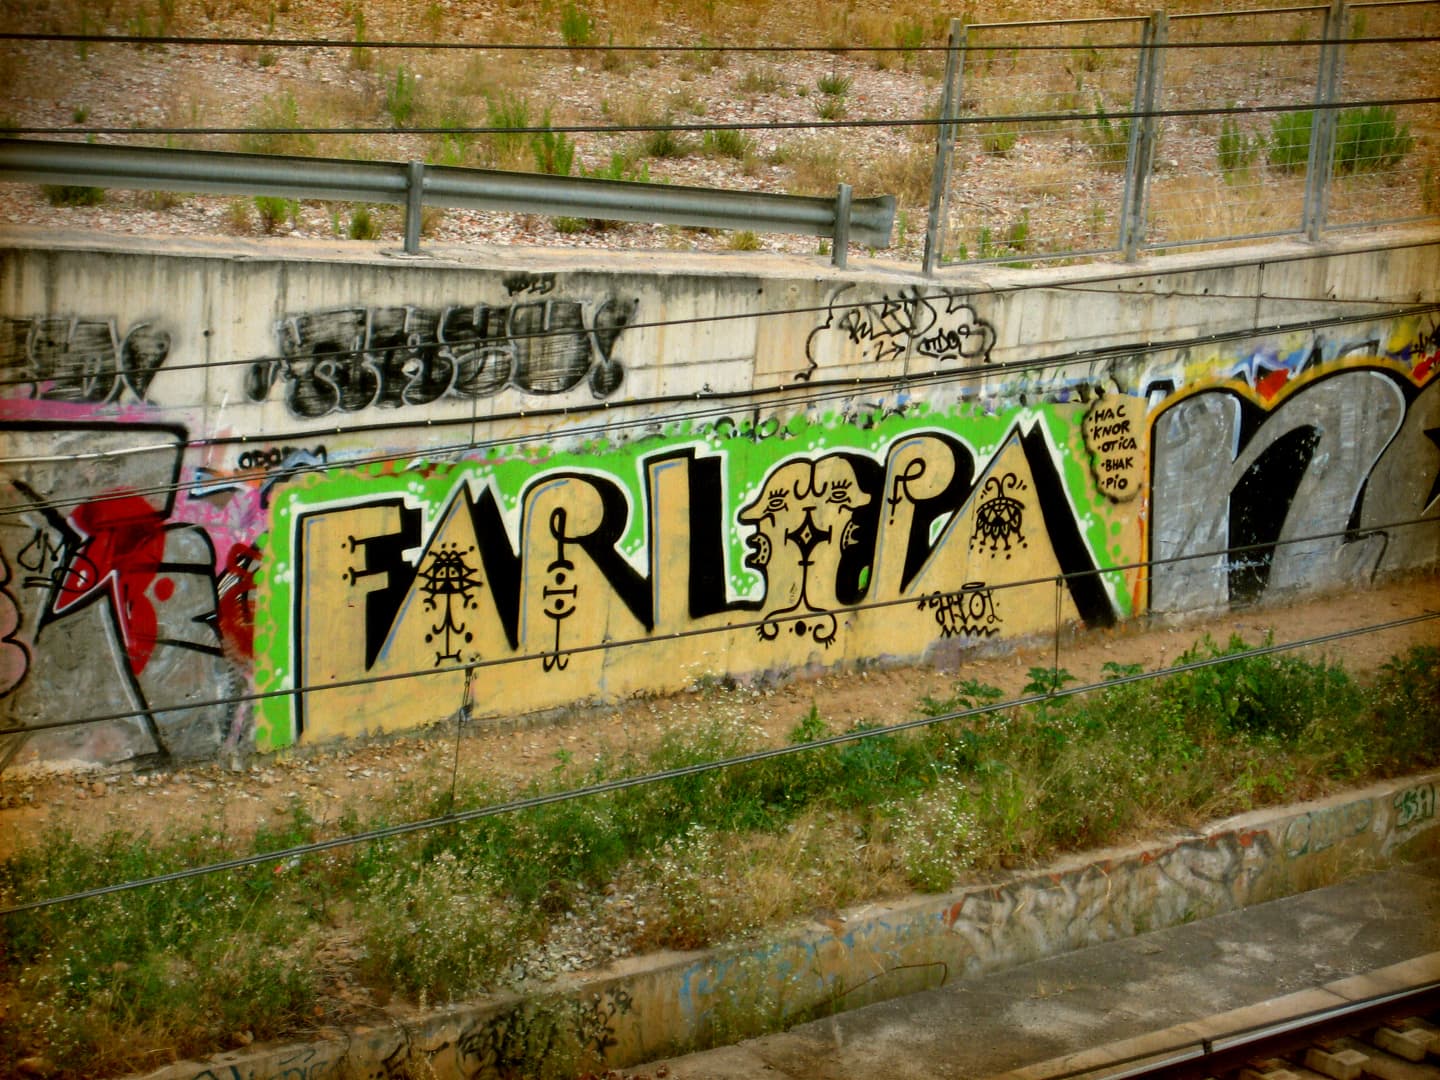 Spanish Graffiti on a wall surrounded by a urban landscape